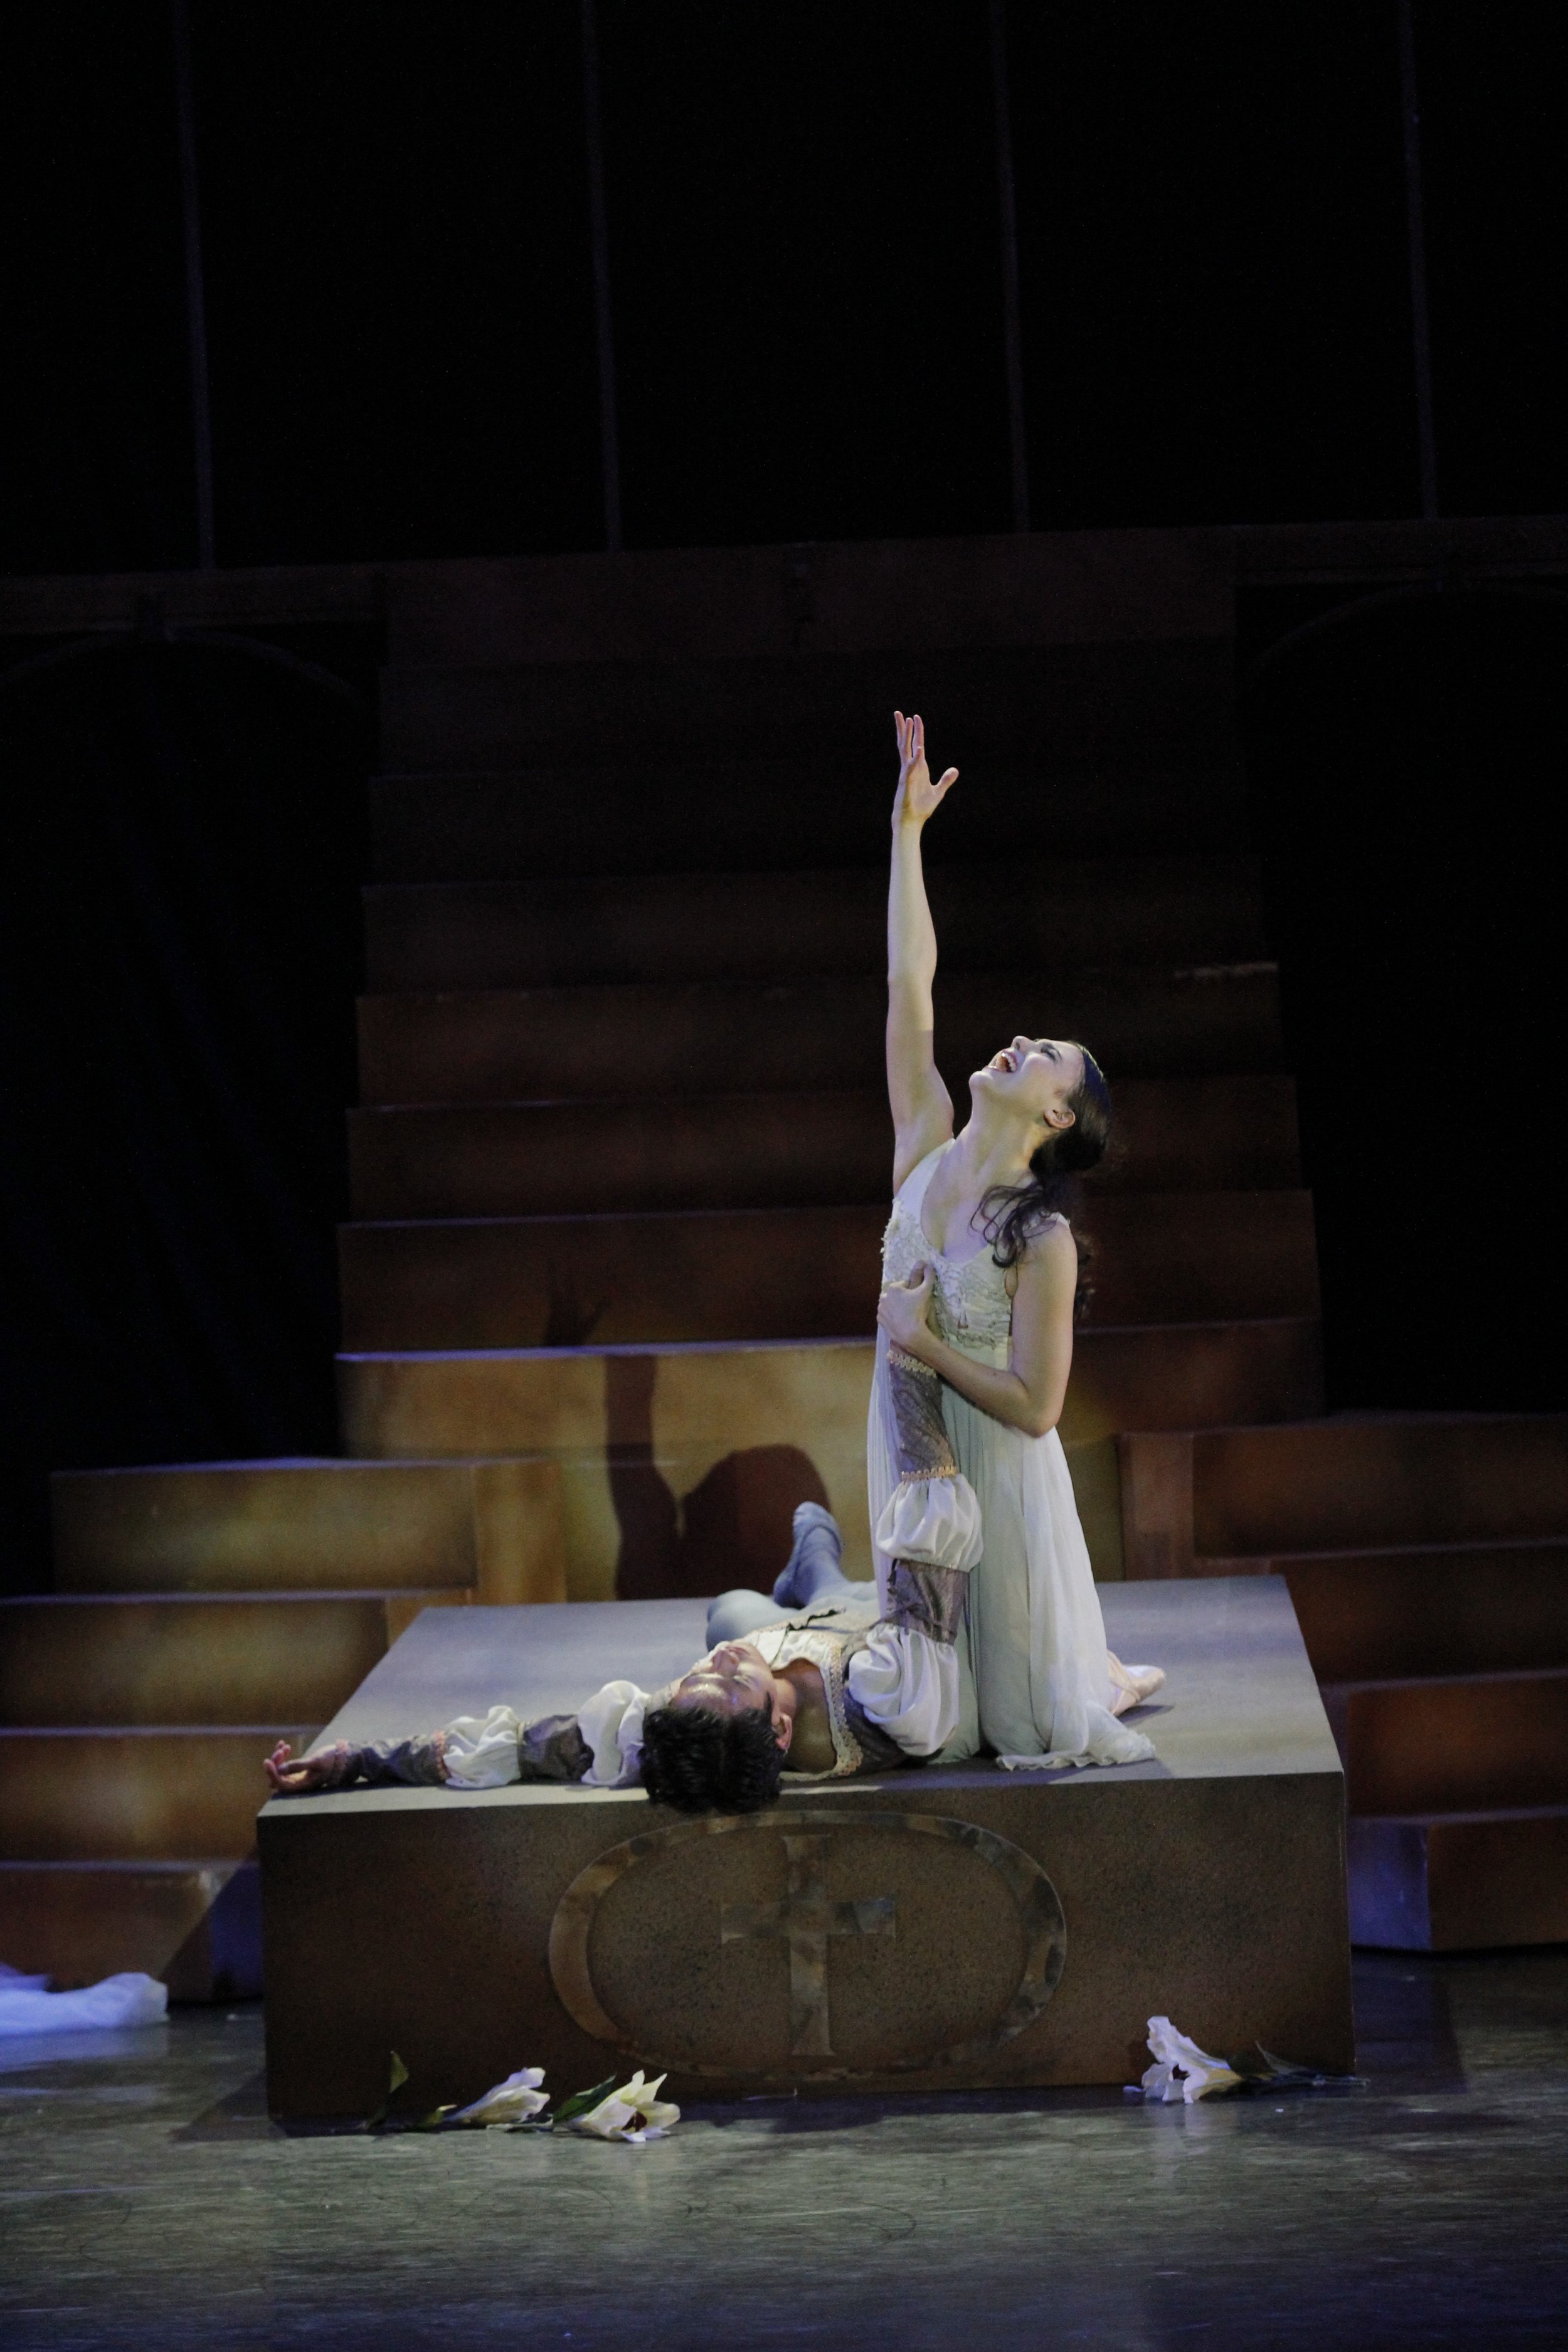    The Shakesperean romantic tragedy that is  Romeo and Juliet  finds an emotion-fraught ballet interpretation by Paul Vasterling in 2015. Planning to evade their warring clans by escaping with Romeo, Juliet (Katherine Barkman) agrees to drink a slee